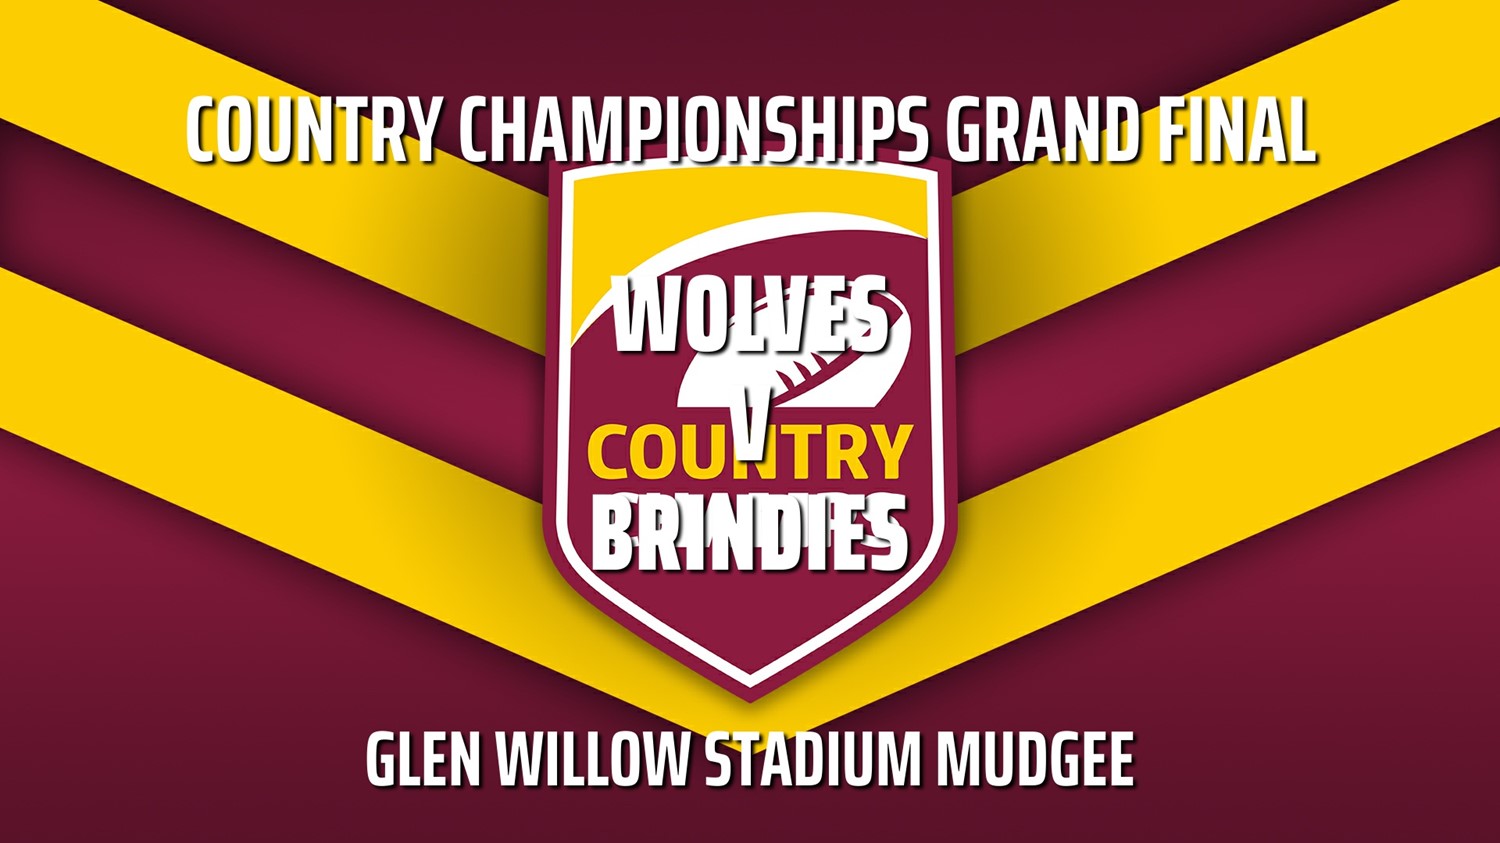 231015-Country Championships Grand Final - Women's Open - Wallsend Wolves v Canberra Brindies Minigame Slate Image